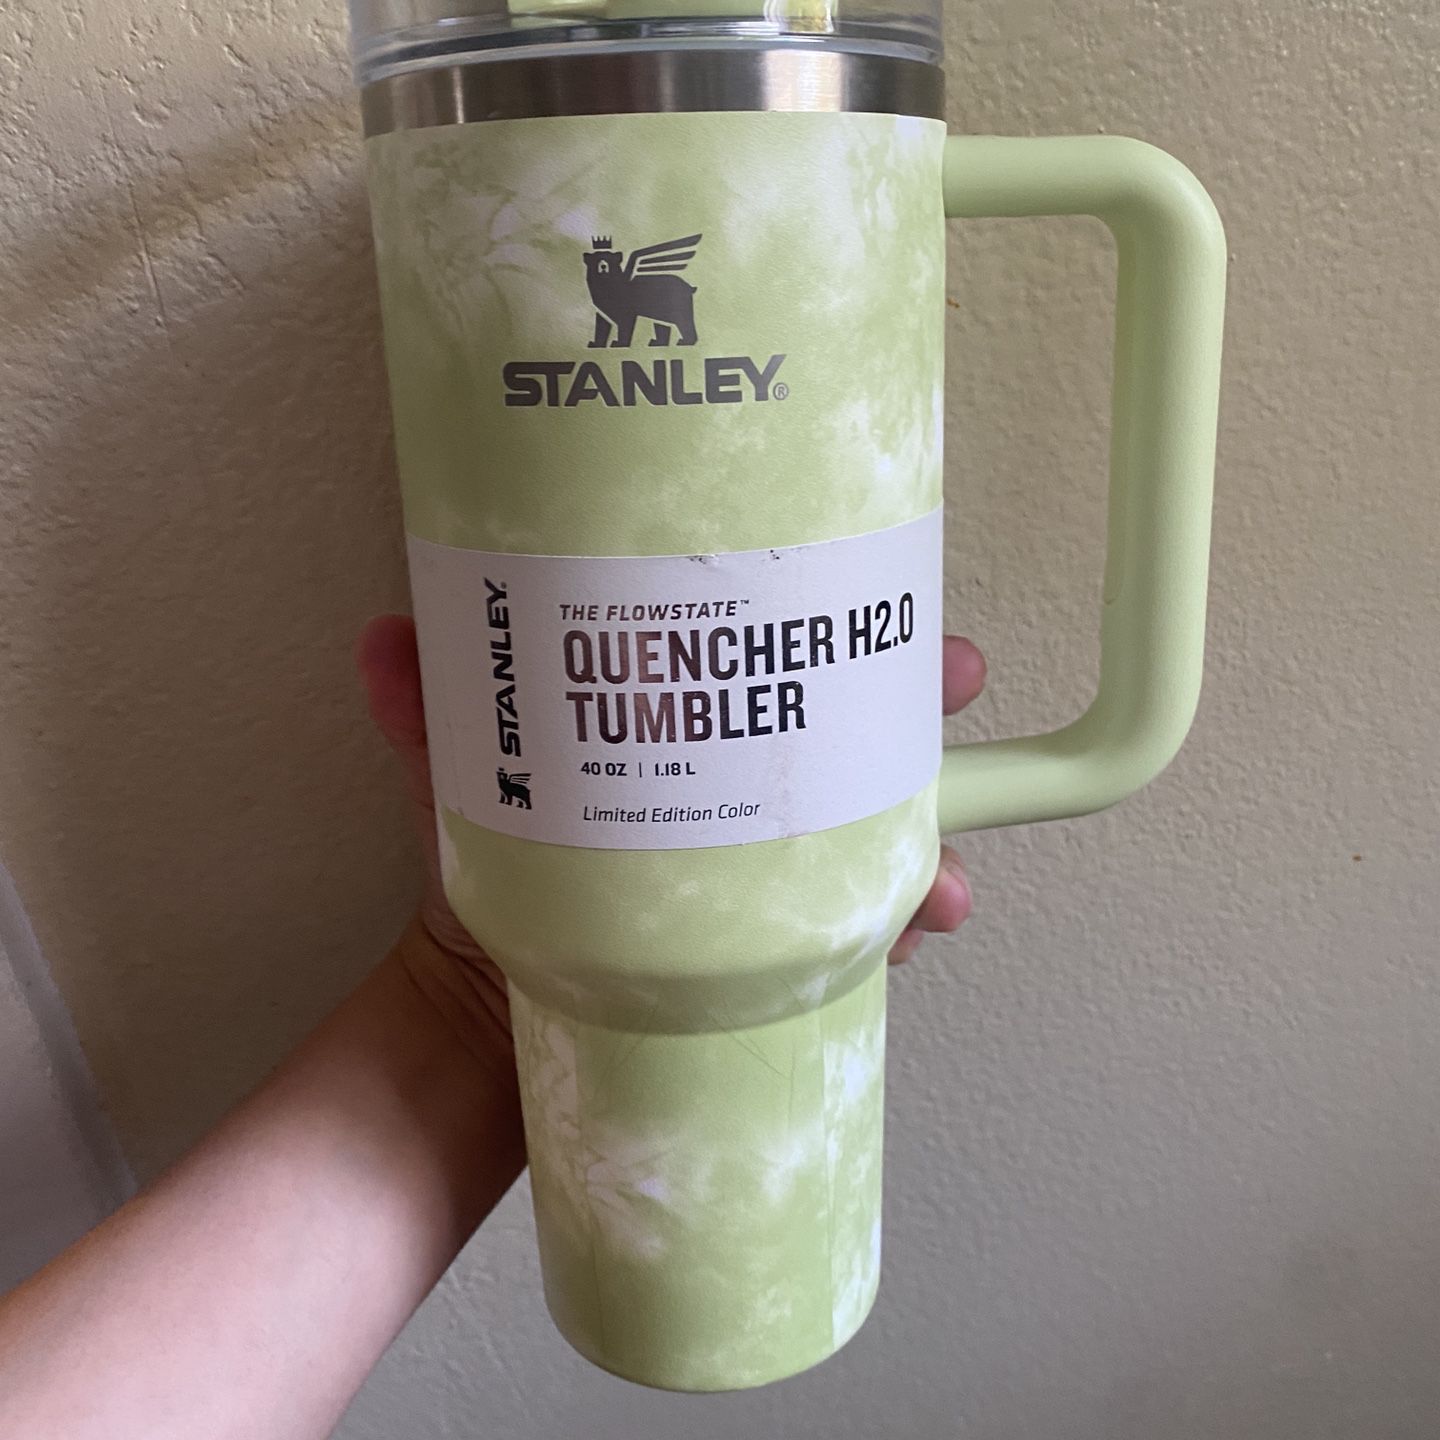 Tie Die Lime Green STANLEY Flowstate Quencher H2.0 Tumbler Cup 40